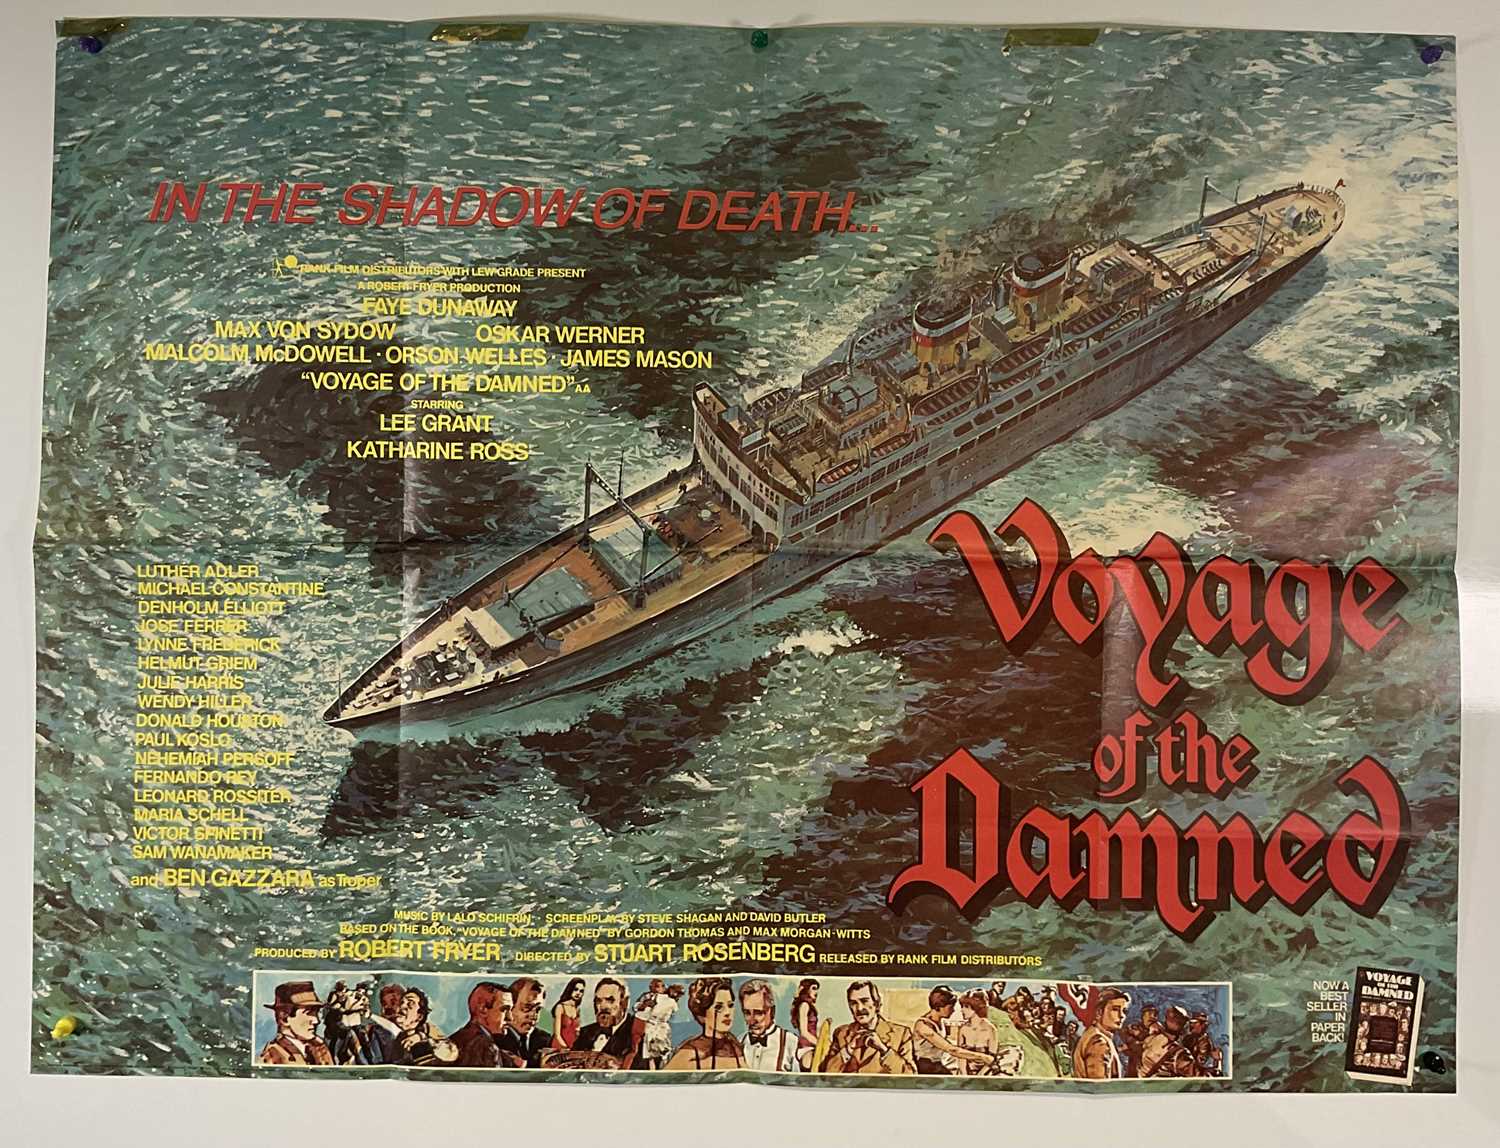 VOYAGE OF THE DAMNED (1976) UK Film poster for the War Drama based on a true story starring Faye